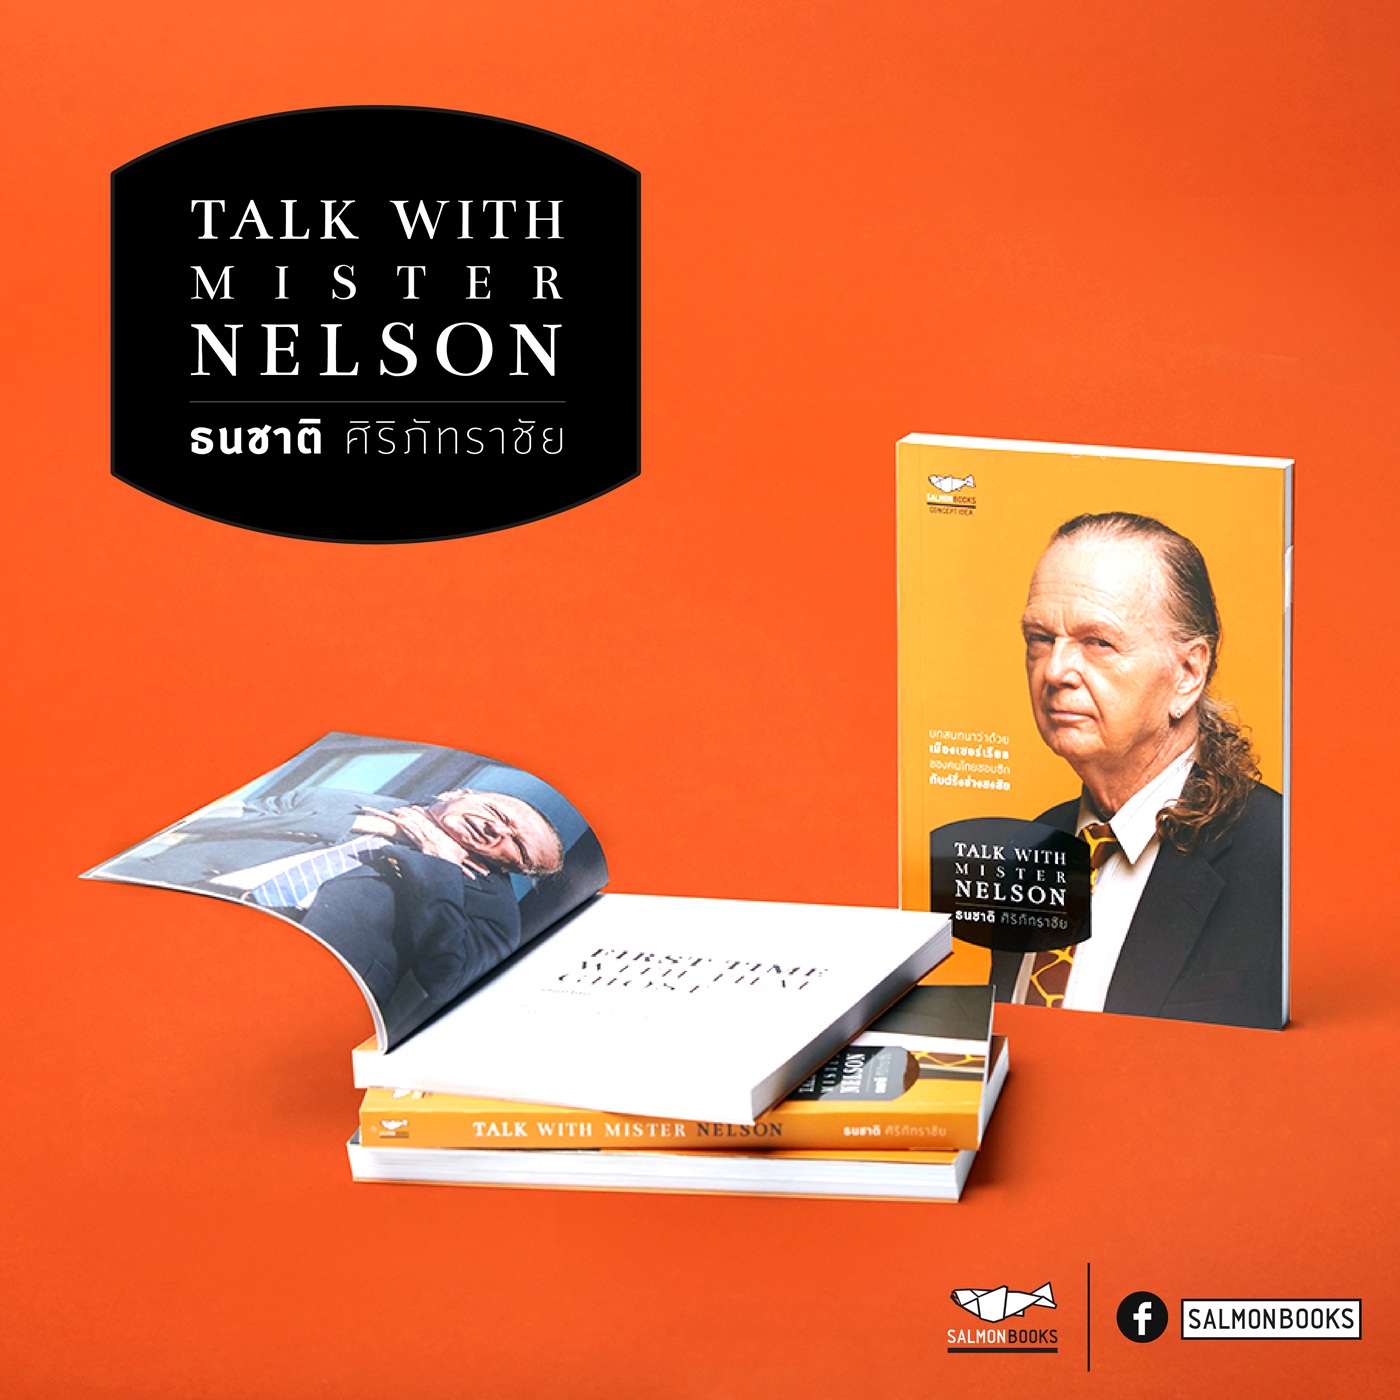 TALK WITH MR. NELSON